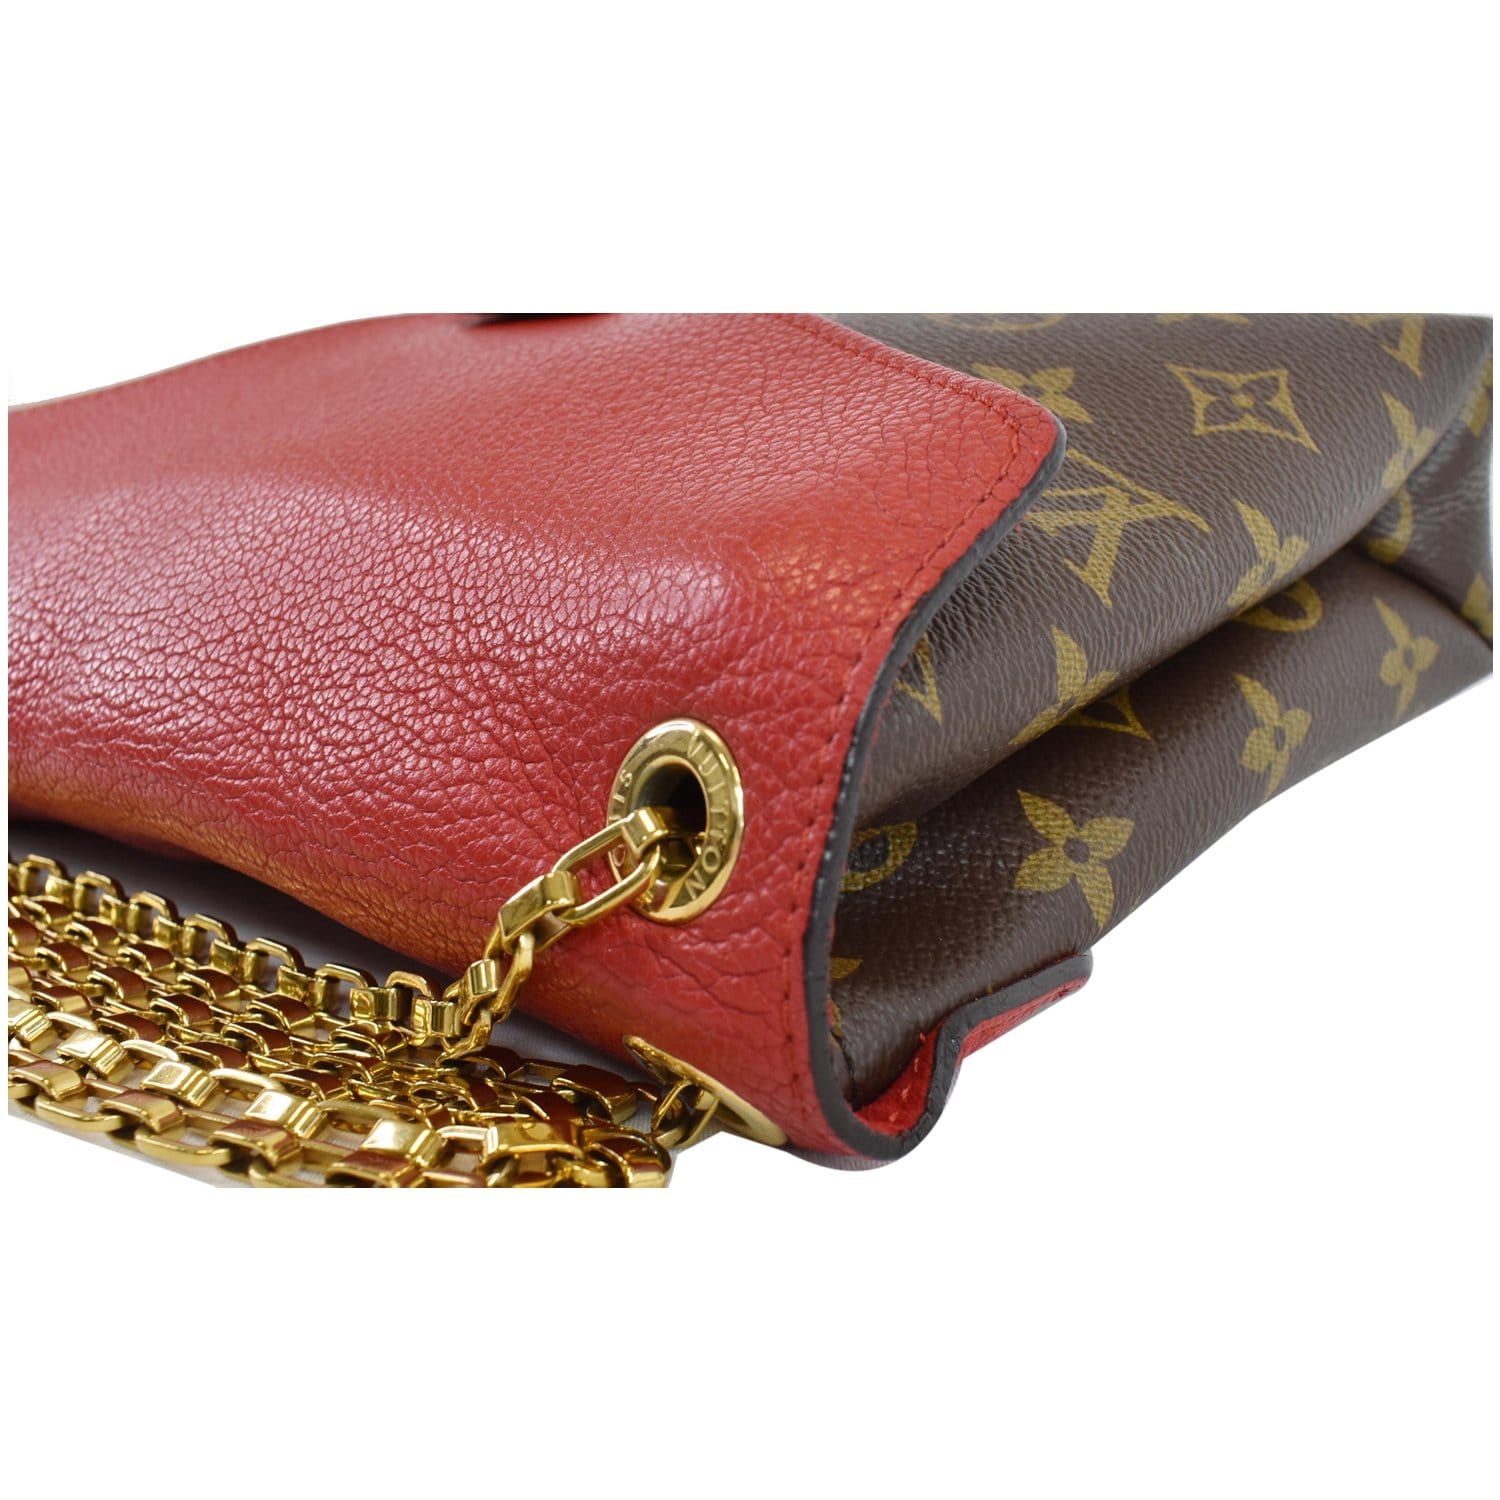 Aurore Leather and Ebene Monogram Coated Canvas Pallas Chain Bag Gold  Hardware, 2014